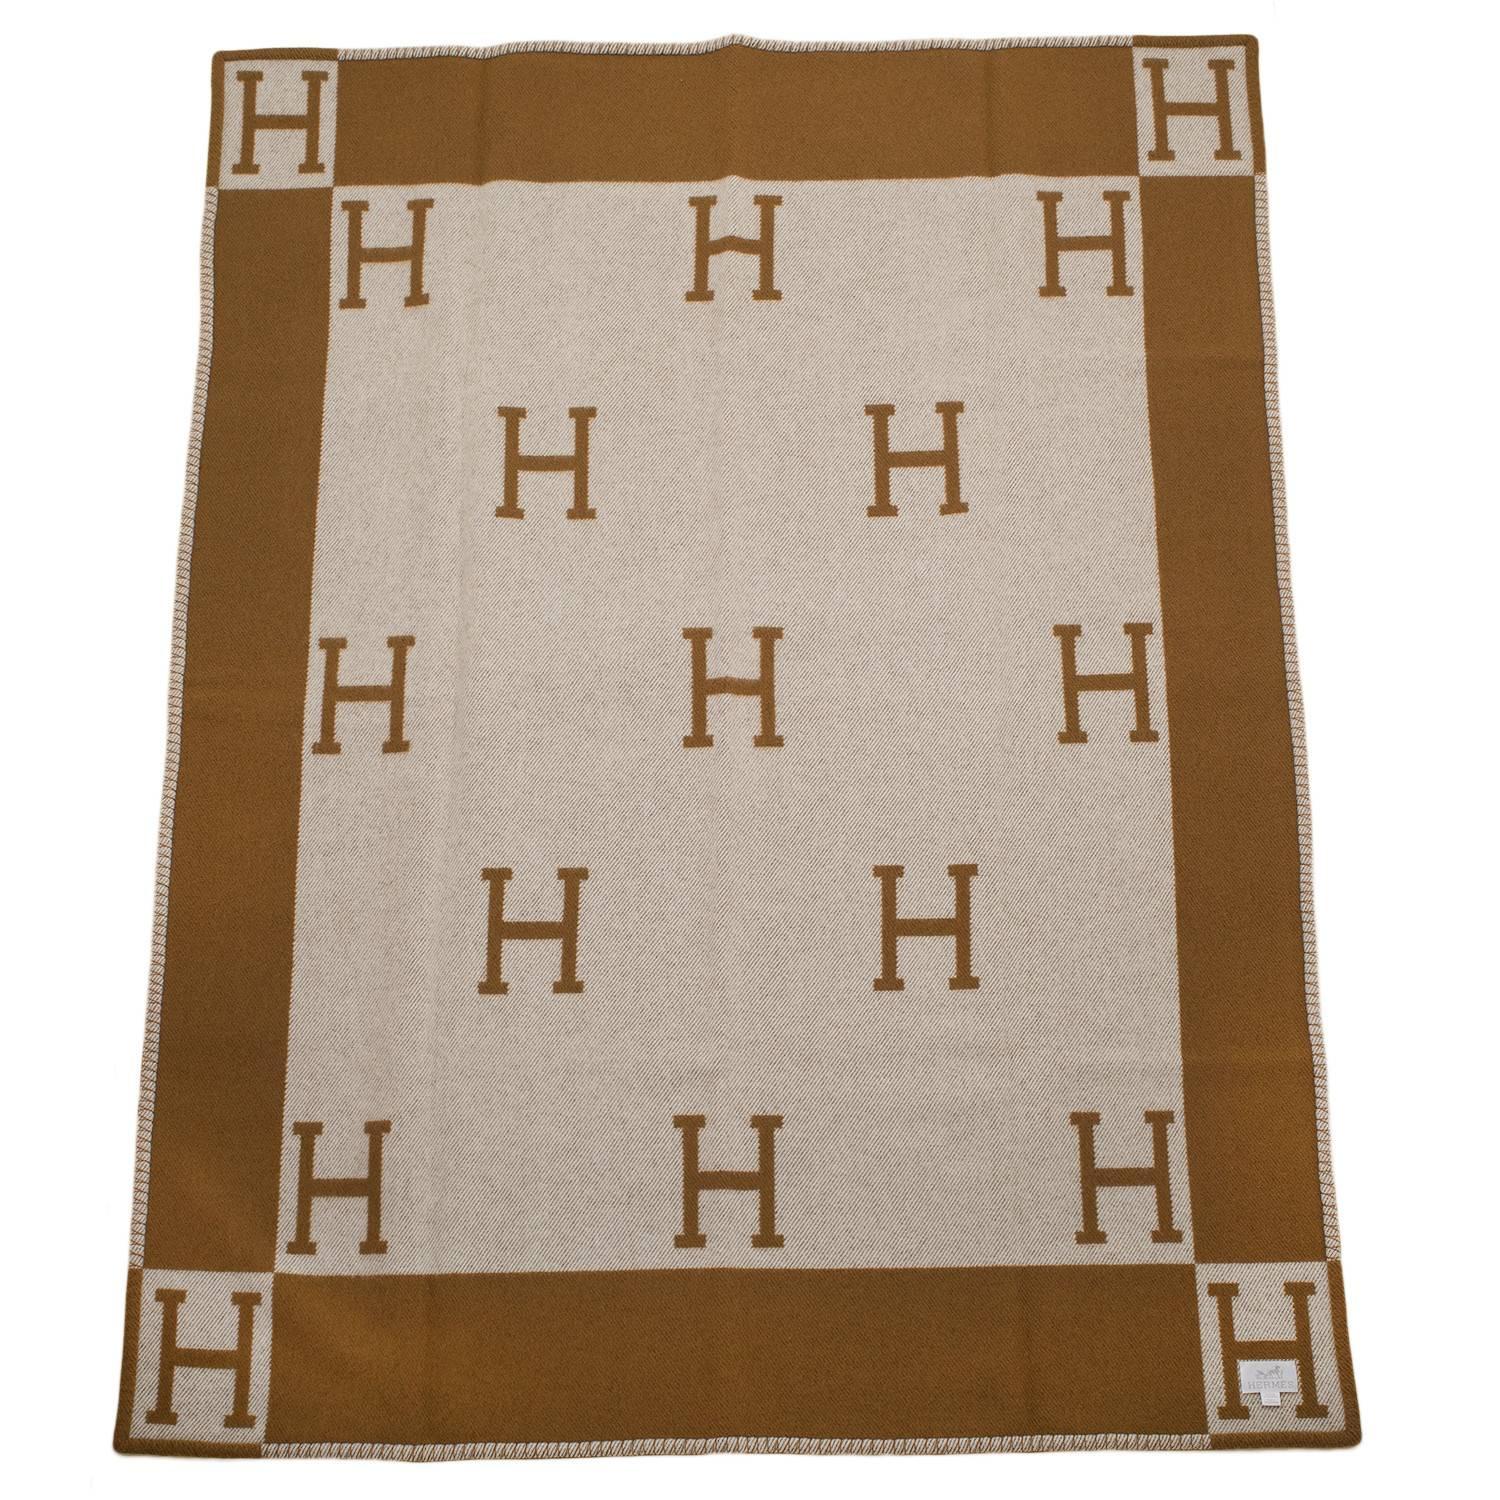 Hermes Classic Avalon Signature H blanket in ecru and camel made of 85% merino wool and 15% cashmere.

Collection: Signature H 

Origin: Great Britain

Condition: Pristine, Store fresh condition

Accompanied by: Box

Measurements: 55